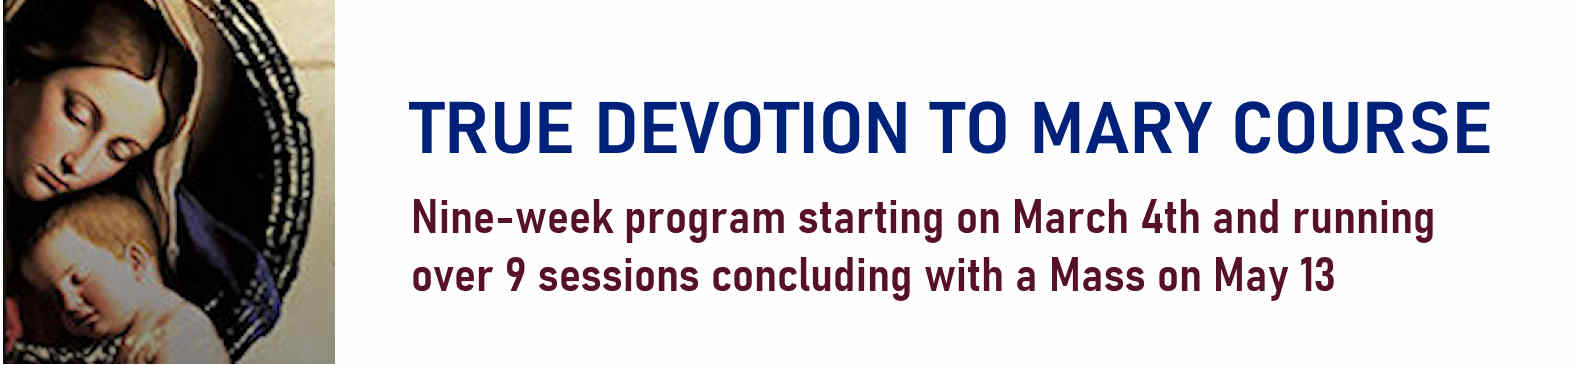 True Devotion to Mary Course